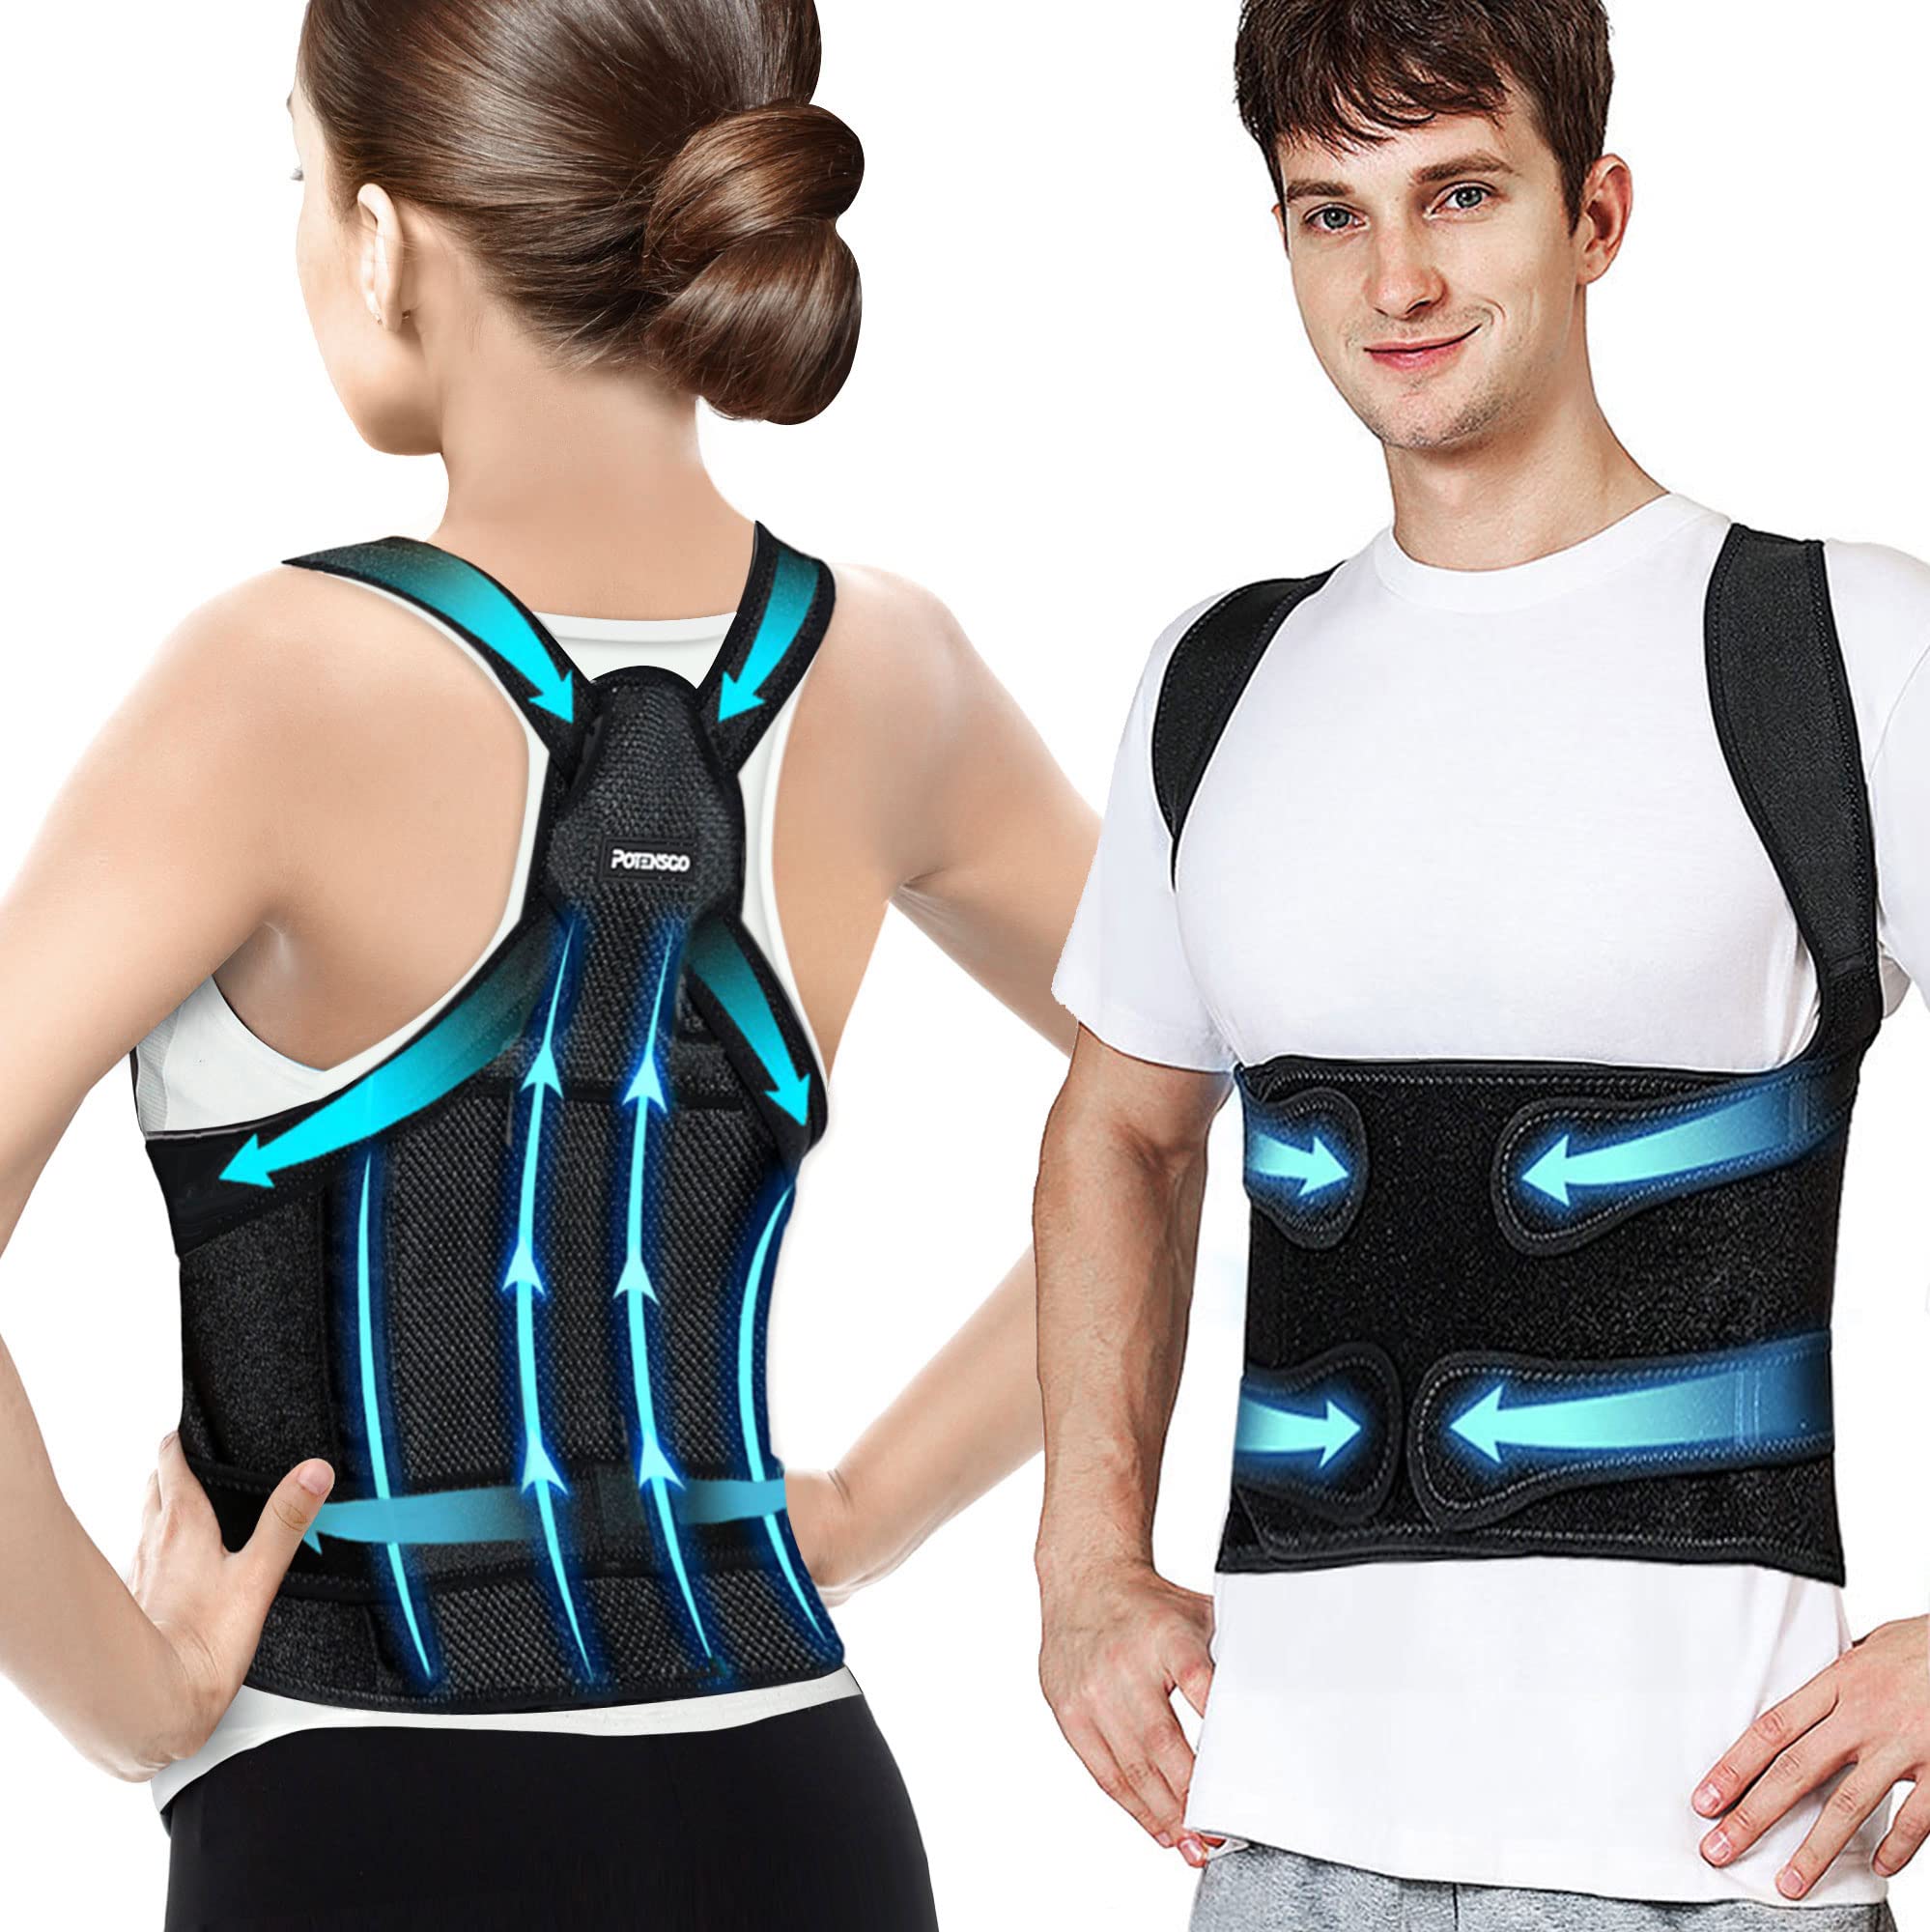 Mercase Posture Corrector for Men and Women, Posture Brace for  Back,Shoulders,Hunchback Scoliosis Correction, Adjustable and Comfortable,  Large(32-39 inches) : Health & Household 